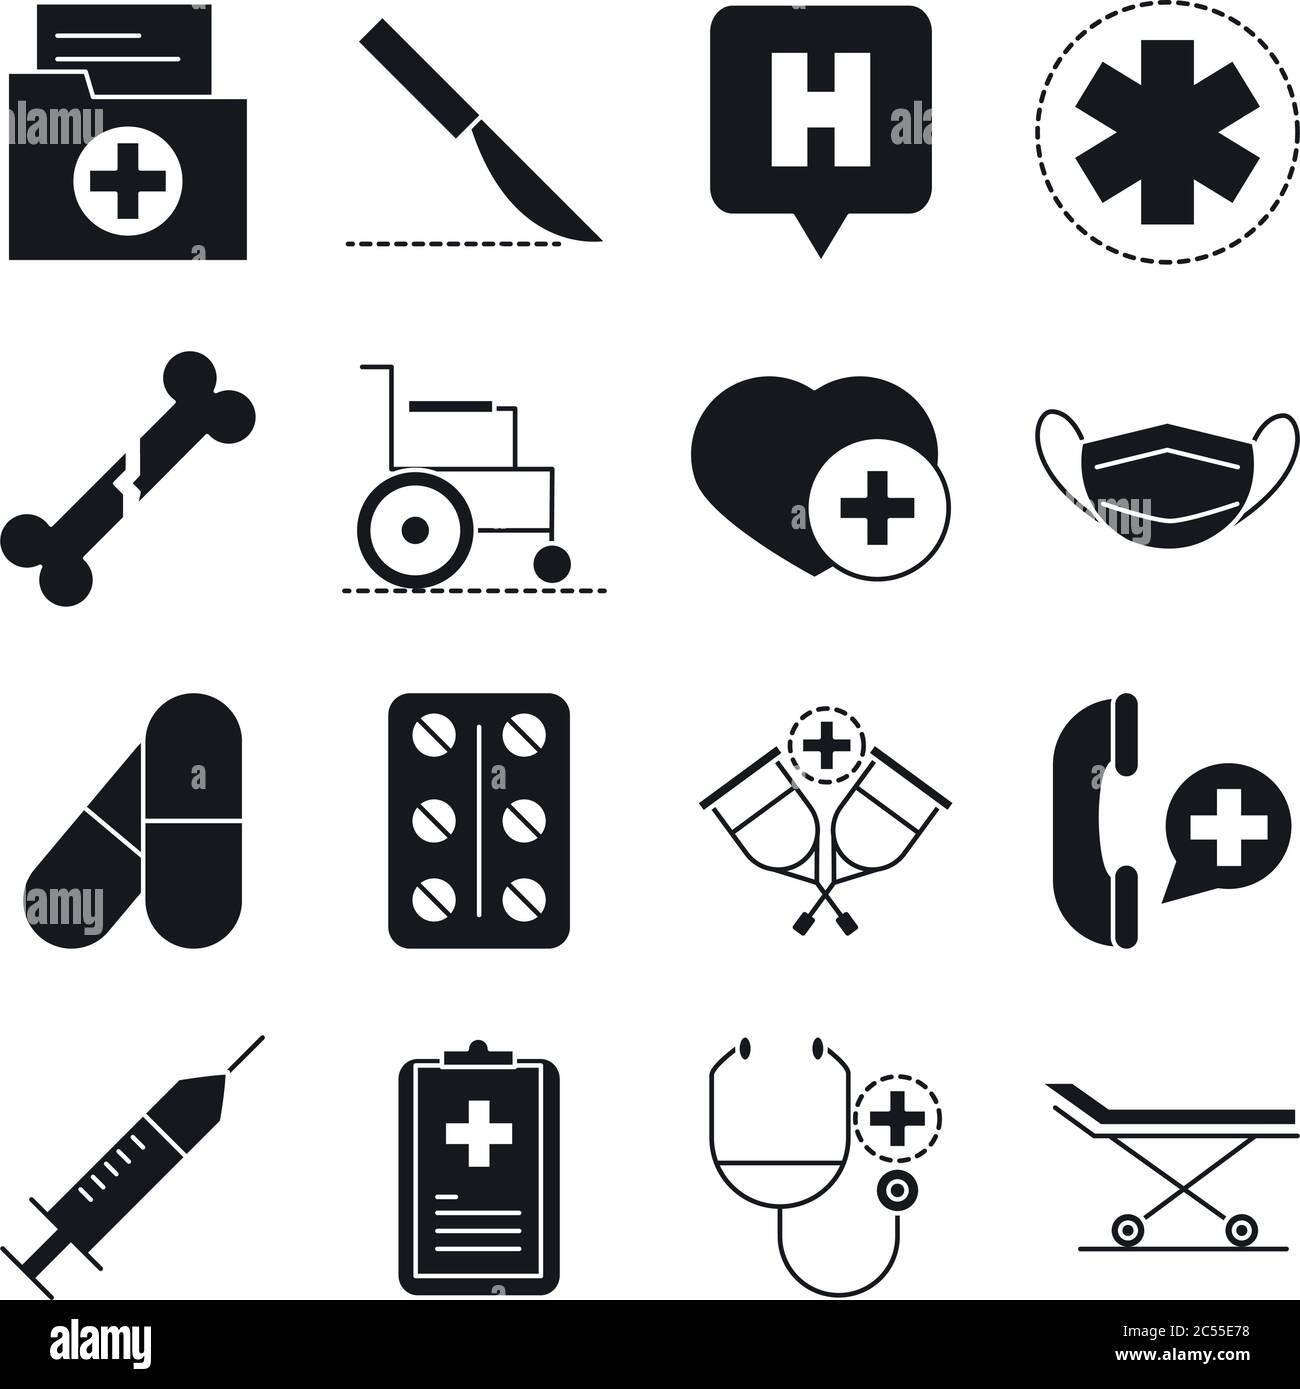 healthcare medical and hospital pictogram silhouette style icon s set vector illustration Stock Vector